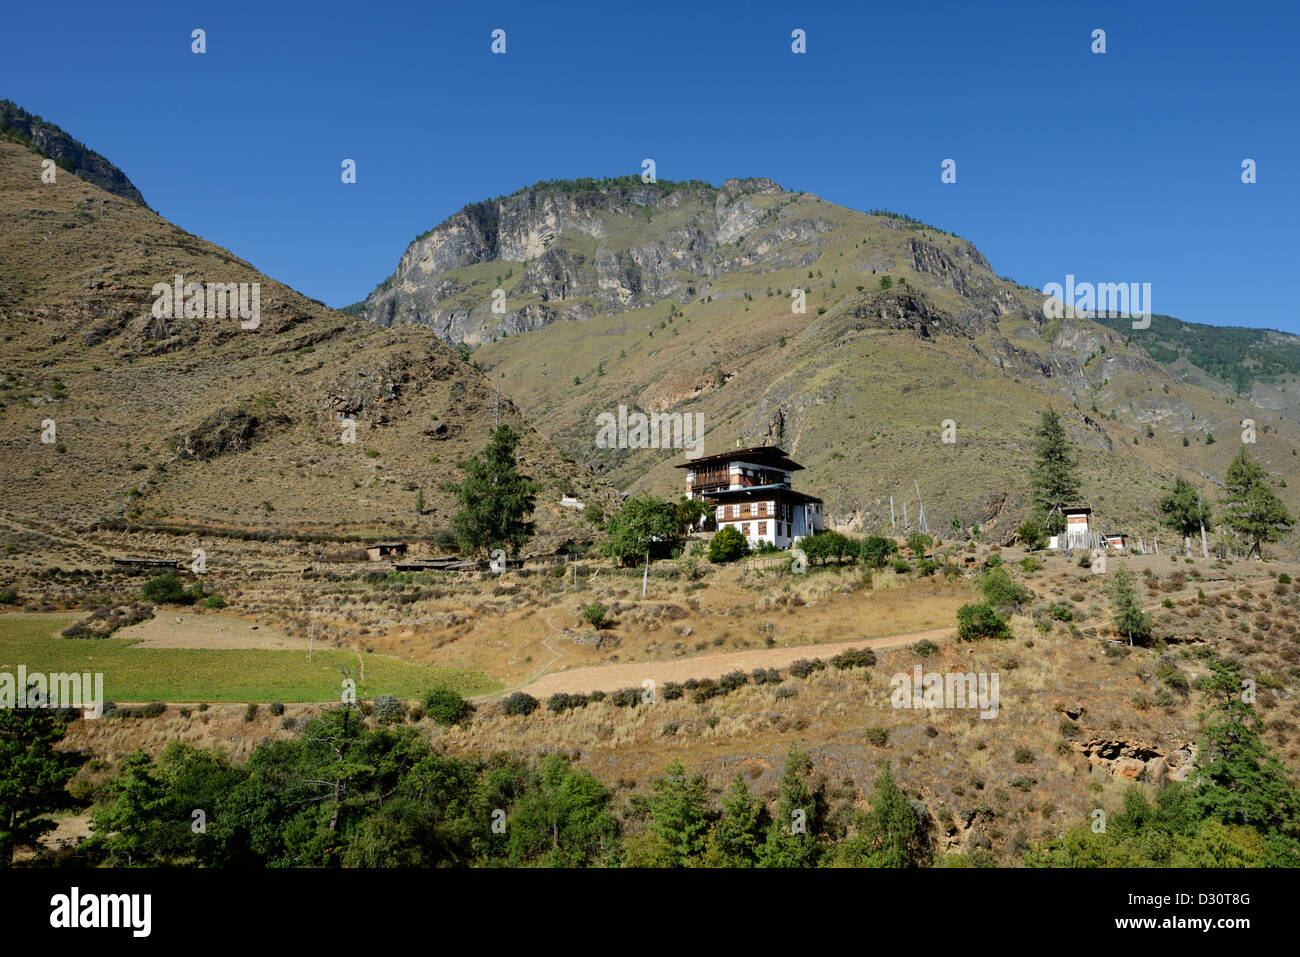 Bhutanese temple, Tachog Lhakhang, with mountain in distance,36MPX,HI-RES Stock Photo